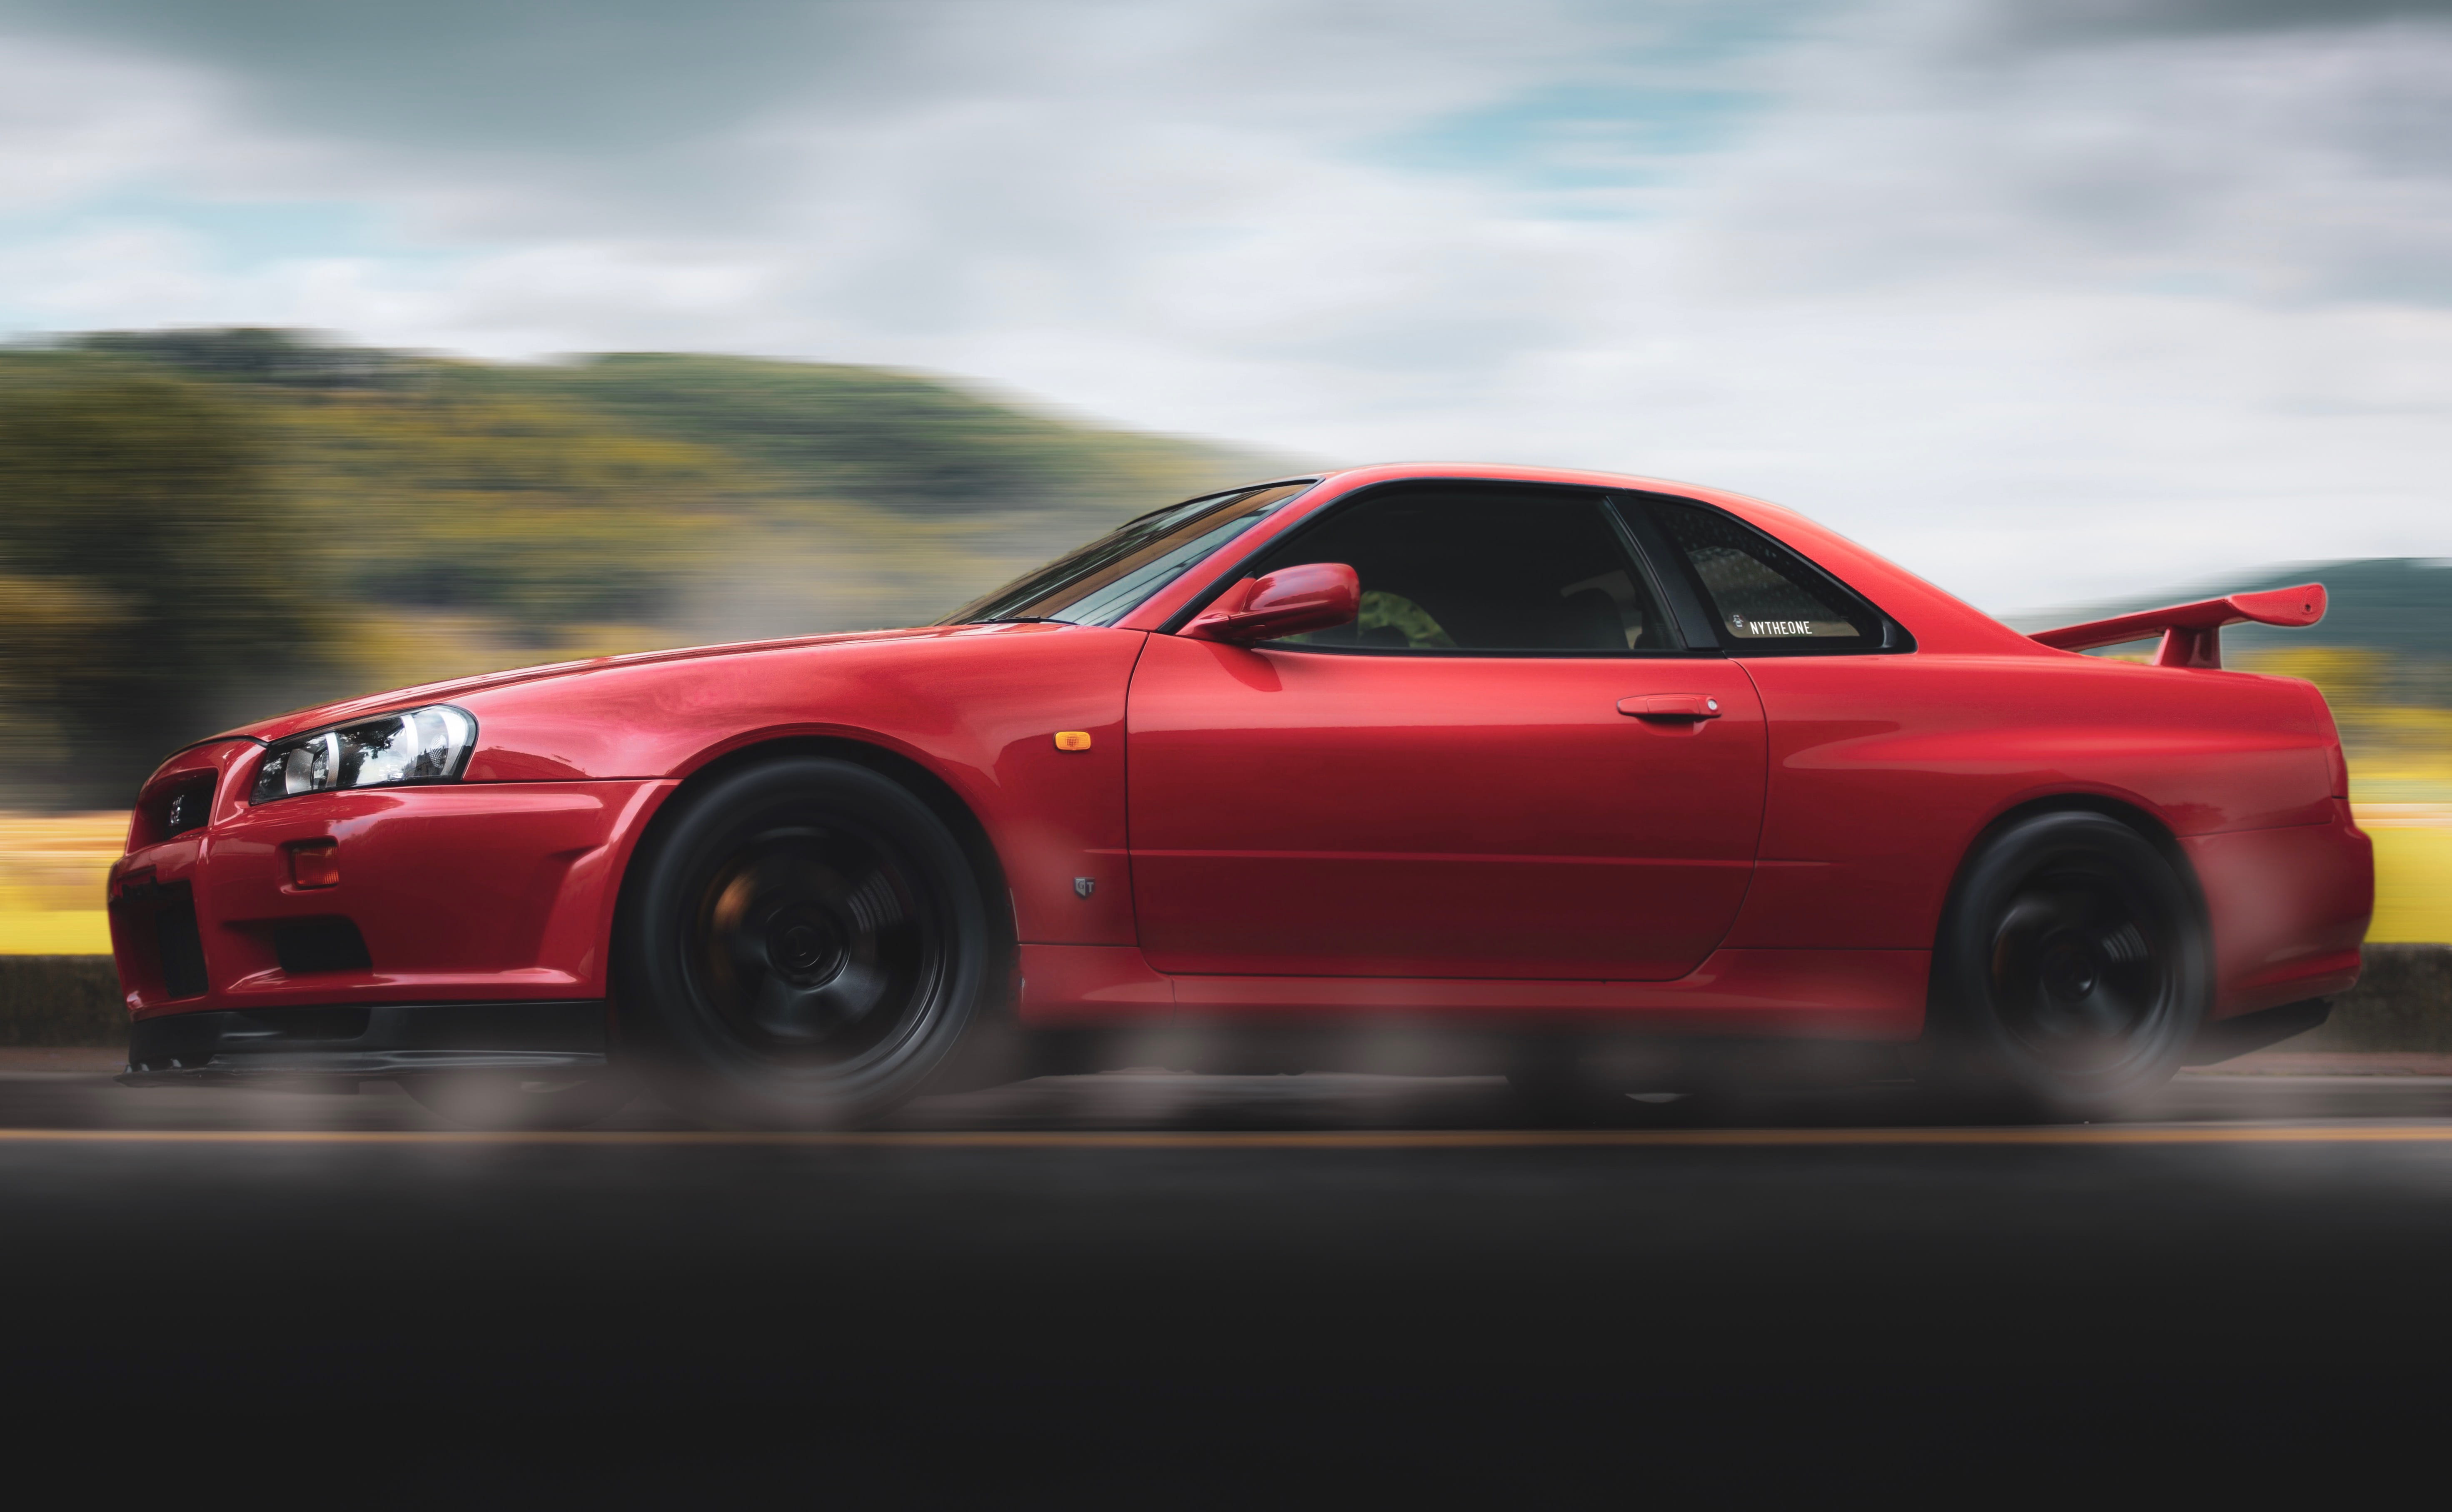 Selective Focus Photography of Red Nissan Gt-r R34 Skyline Running on Road